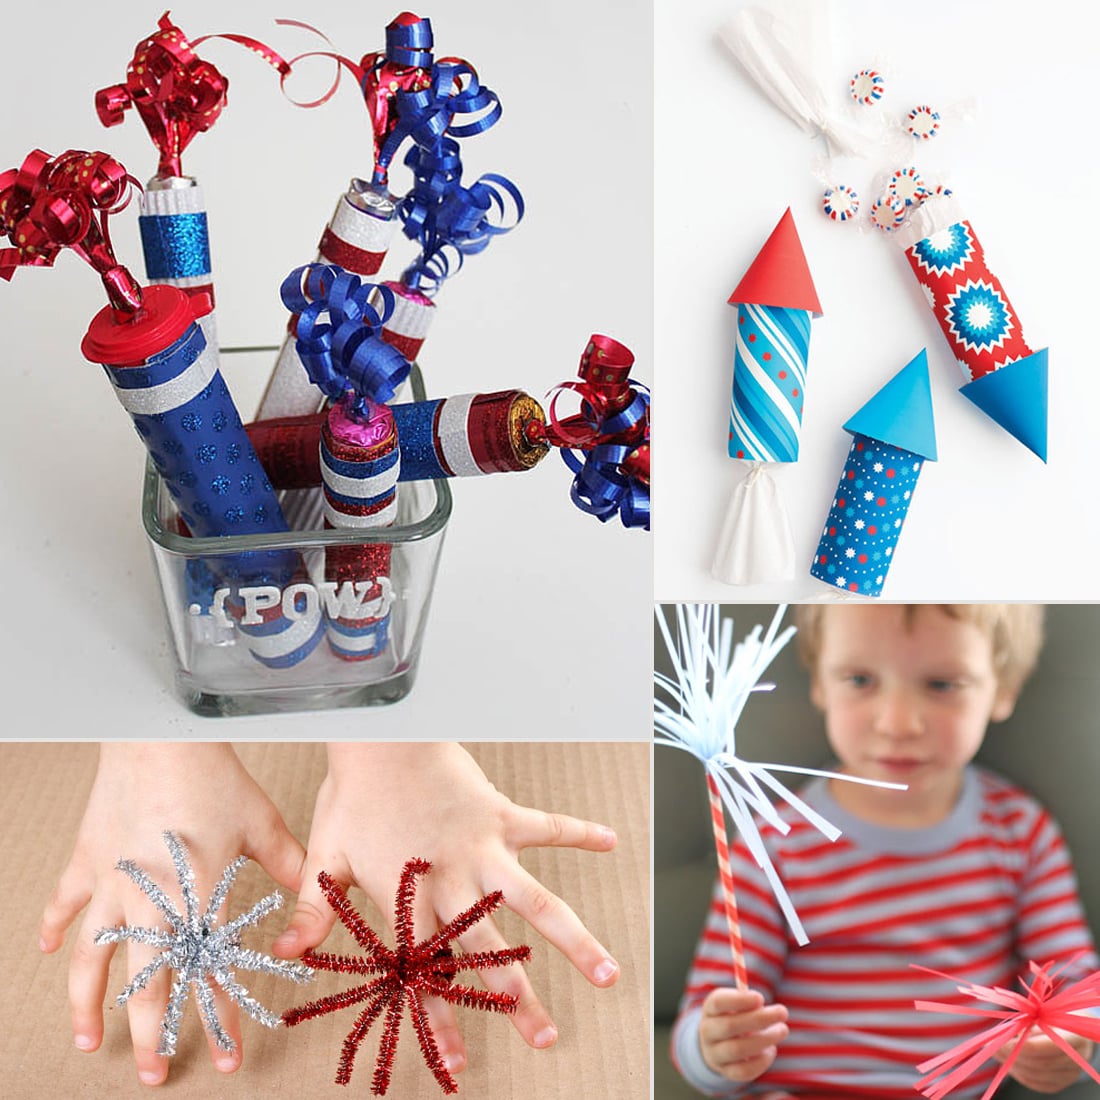 How to Make Sparklers From Pipe Cleaners - Kid-Friendly Fireworks Craft